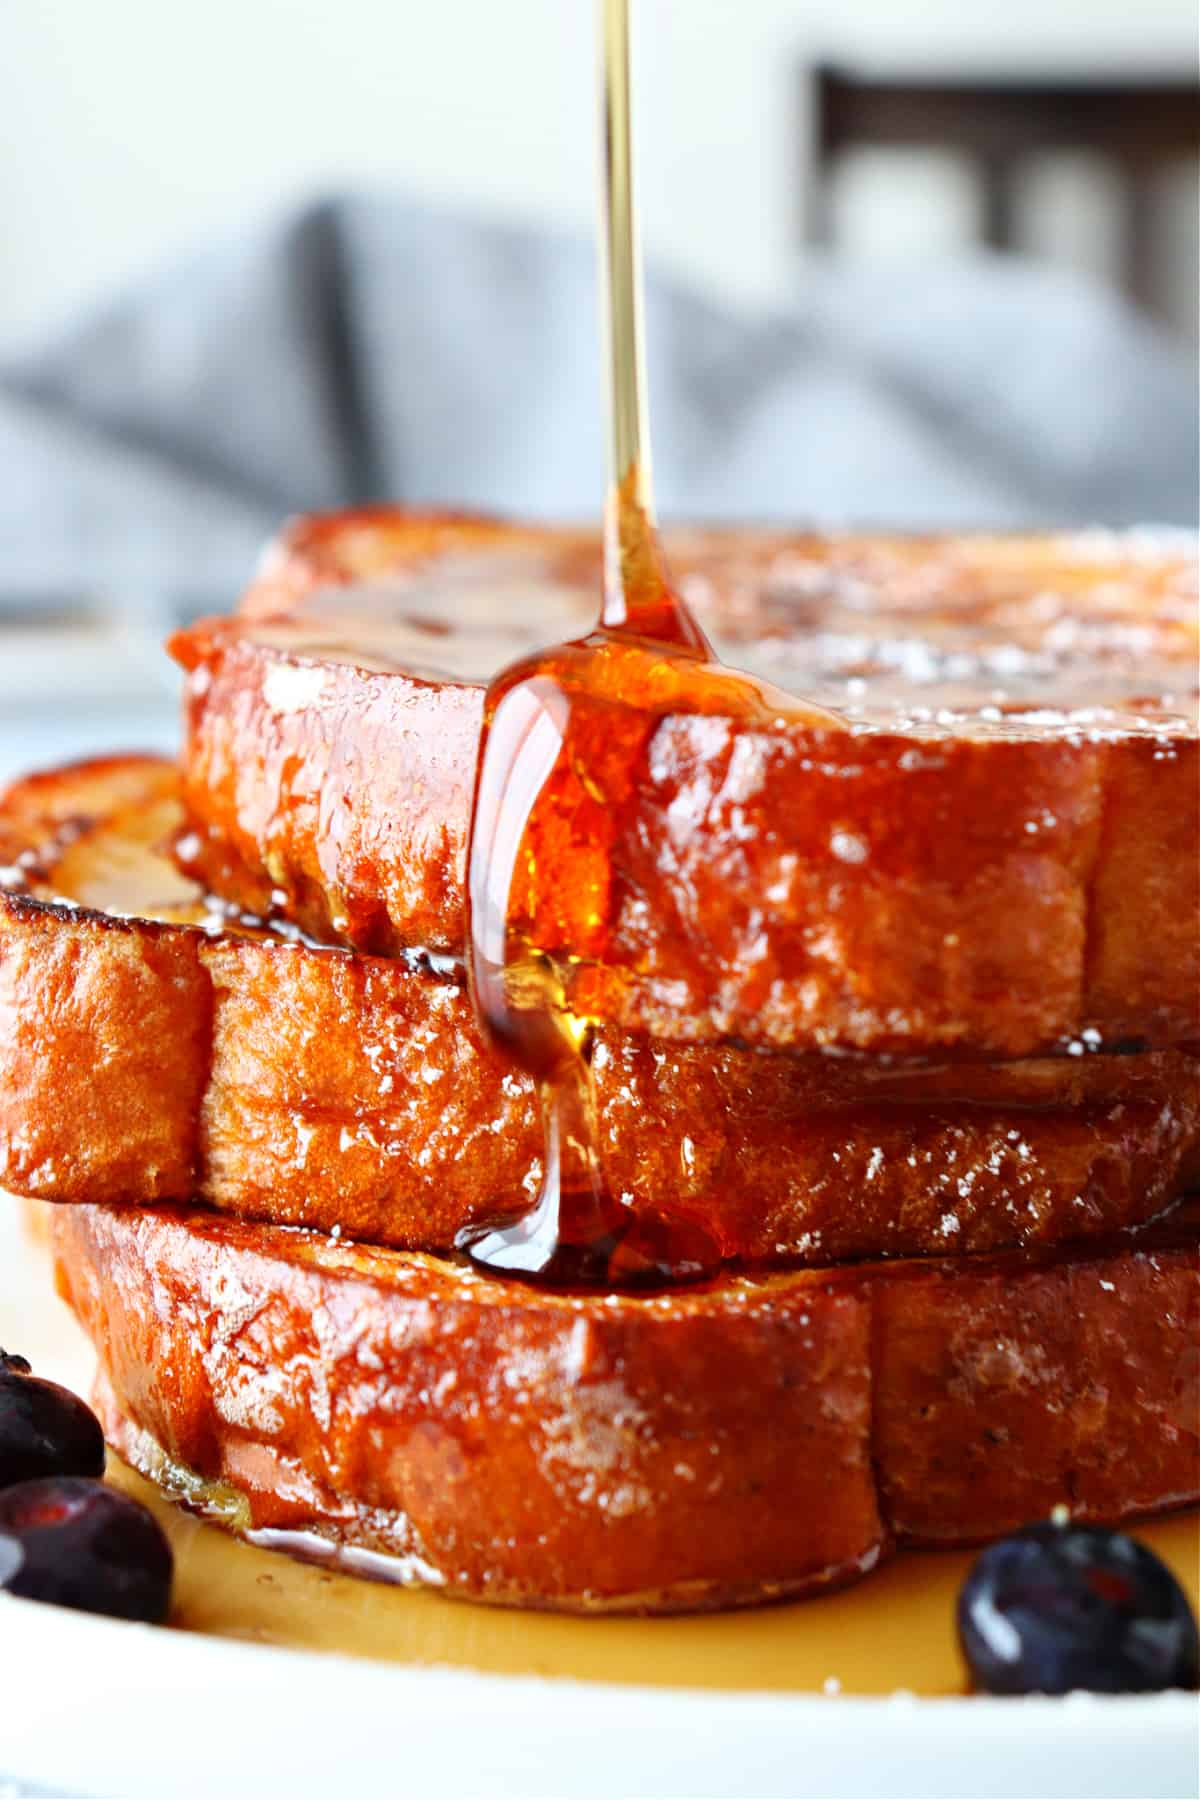 French Toast A Delicious Brunch Recipes: